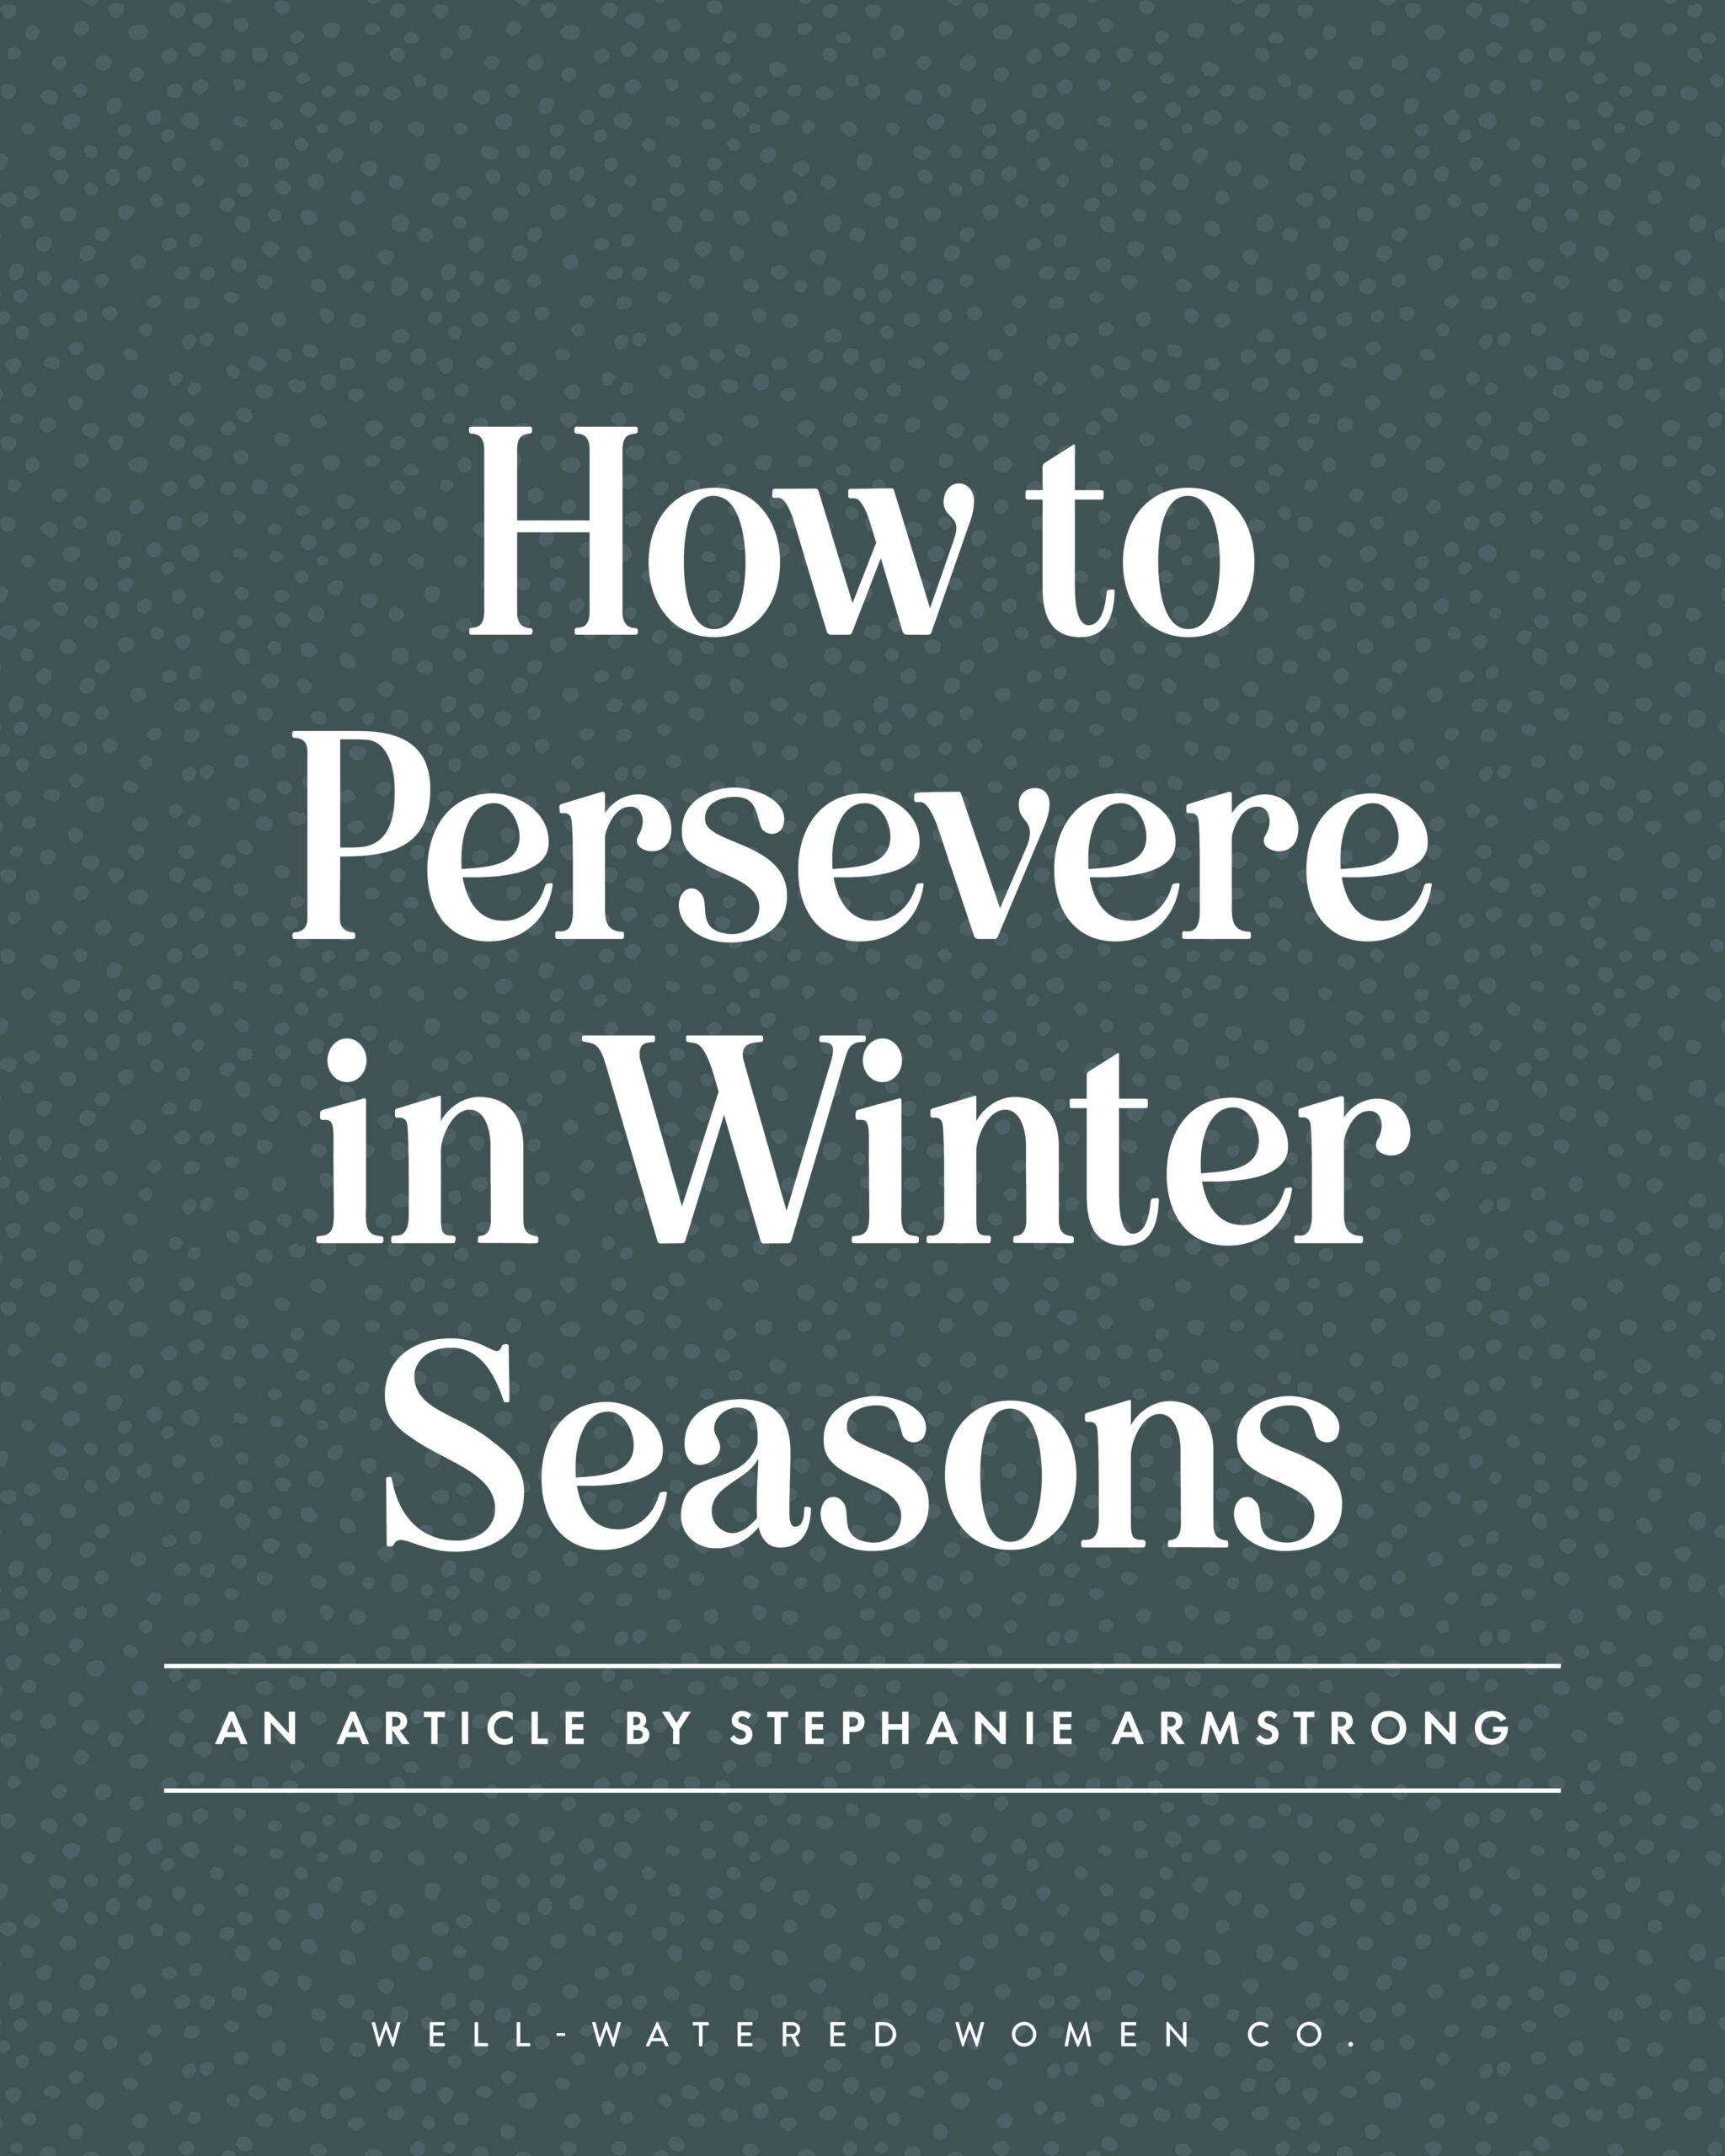 How to Persevere in Winter Seasons - an article from Well-Watered Women